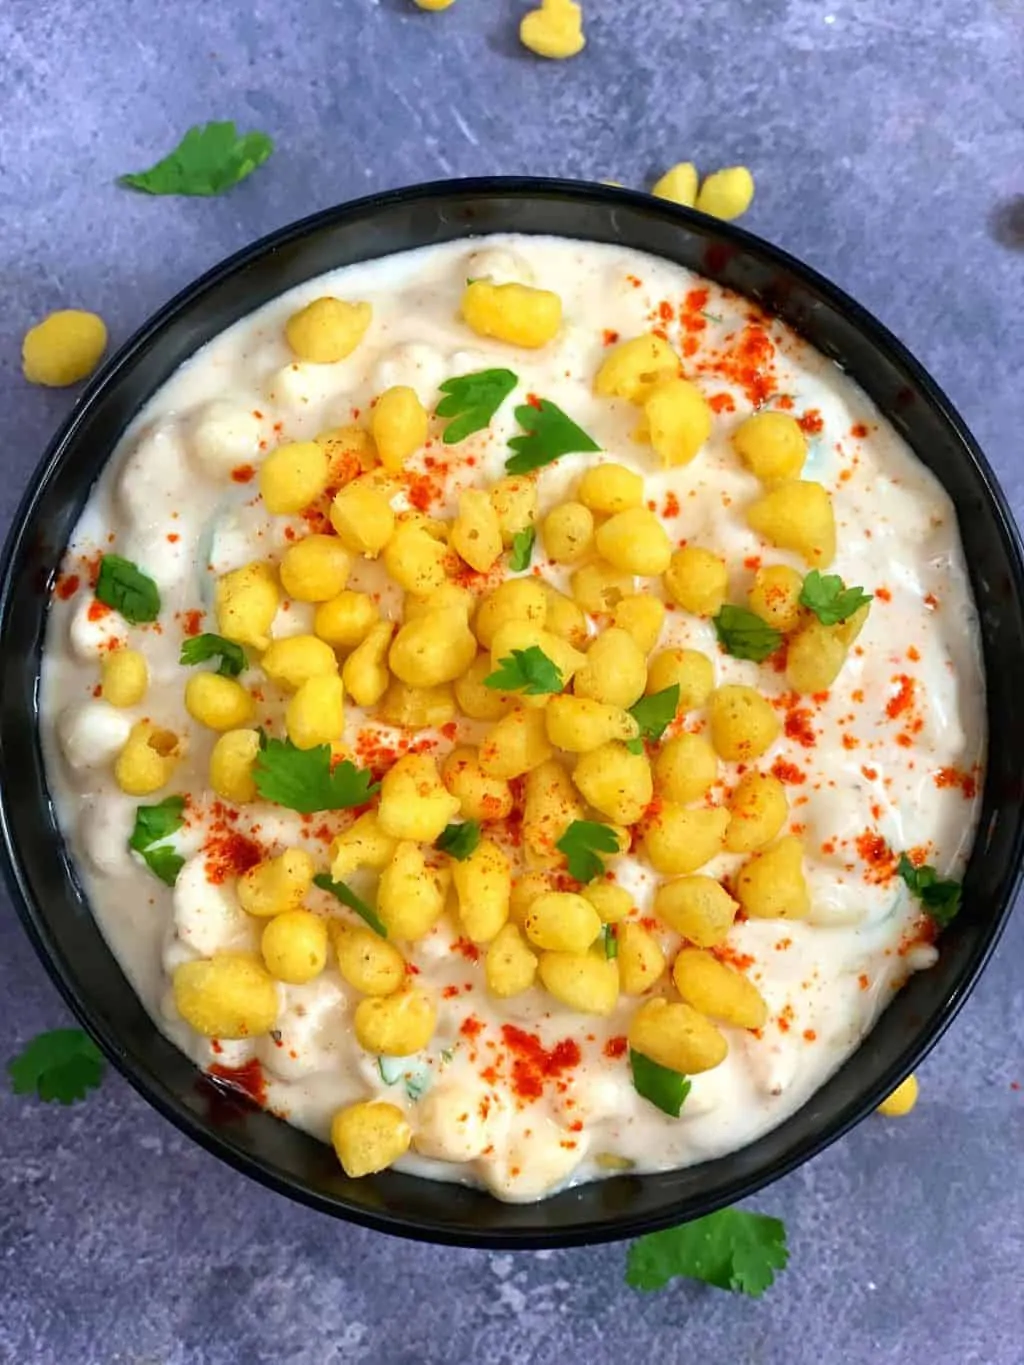 boondi raita served in a bowl topped with dry boondi cilantro and red chili powder